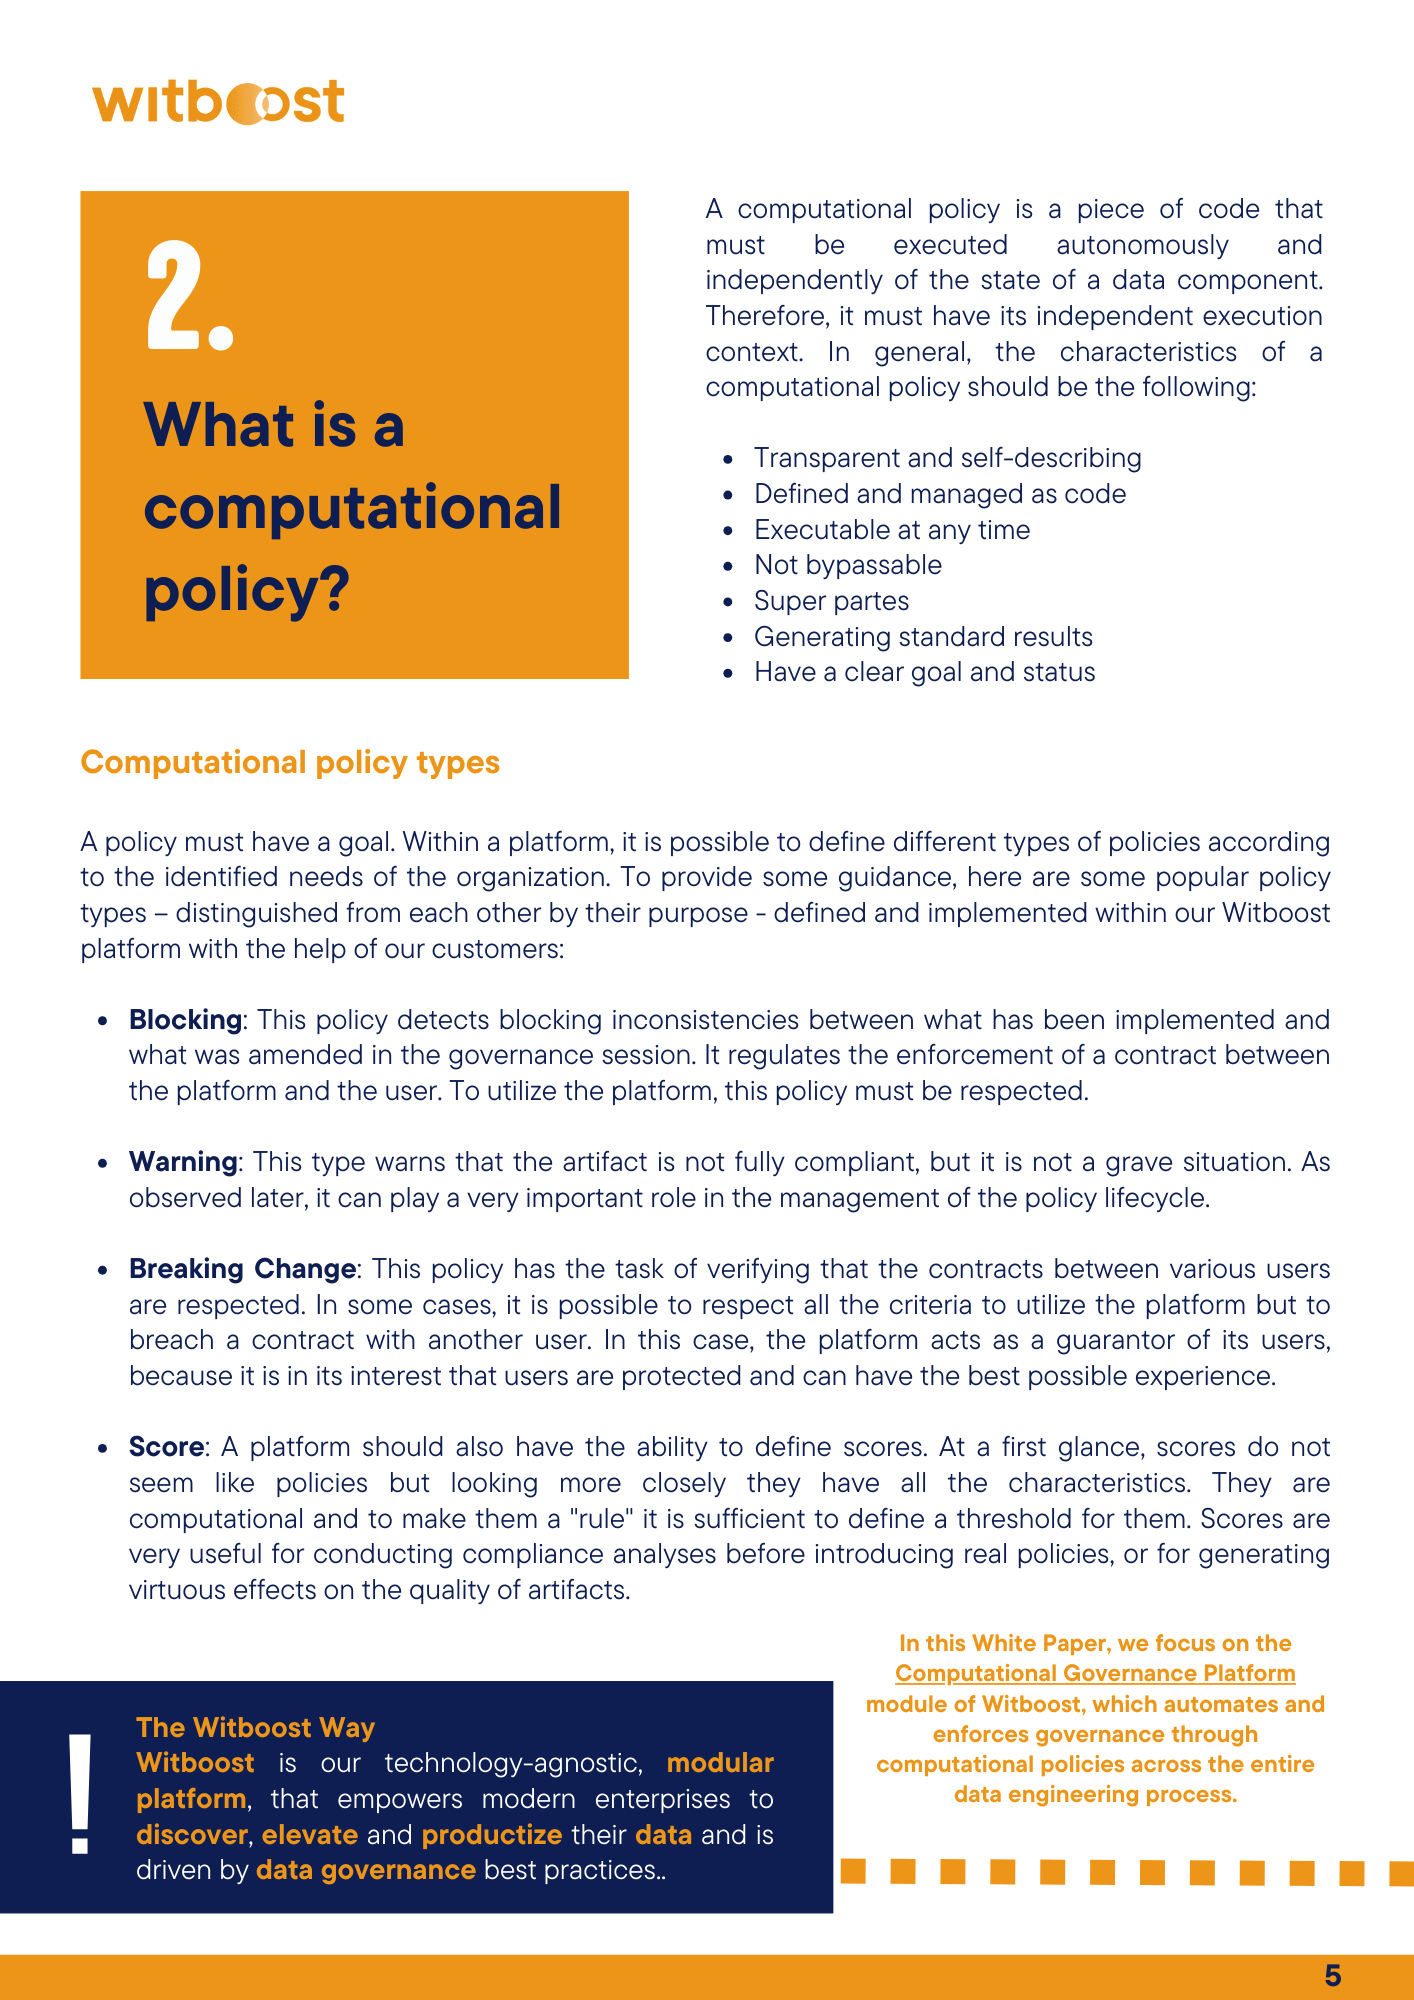 Chapter 2_White Paper_Journey Into the Lifecycle of a Computational Policy